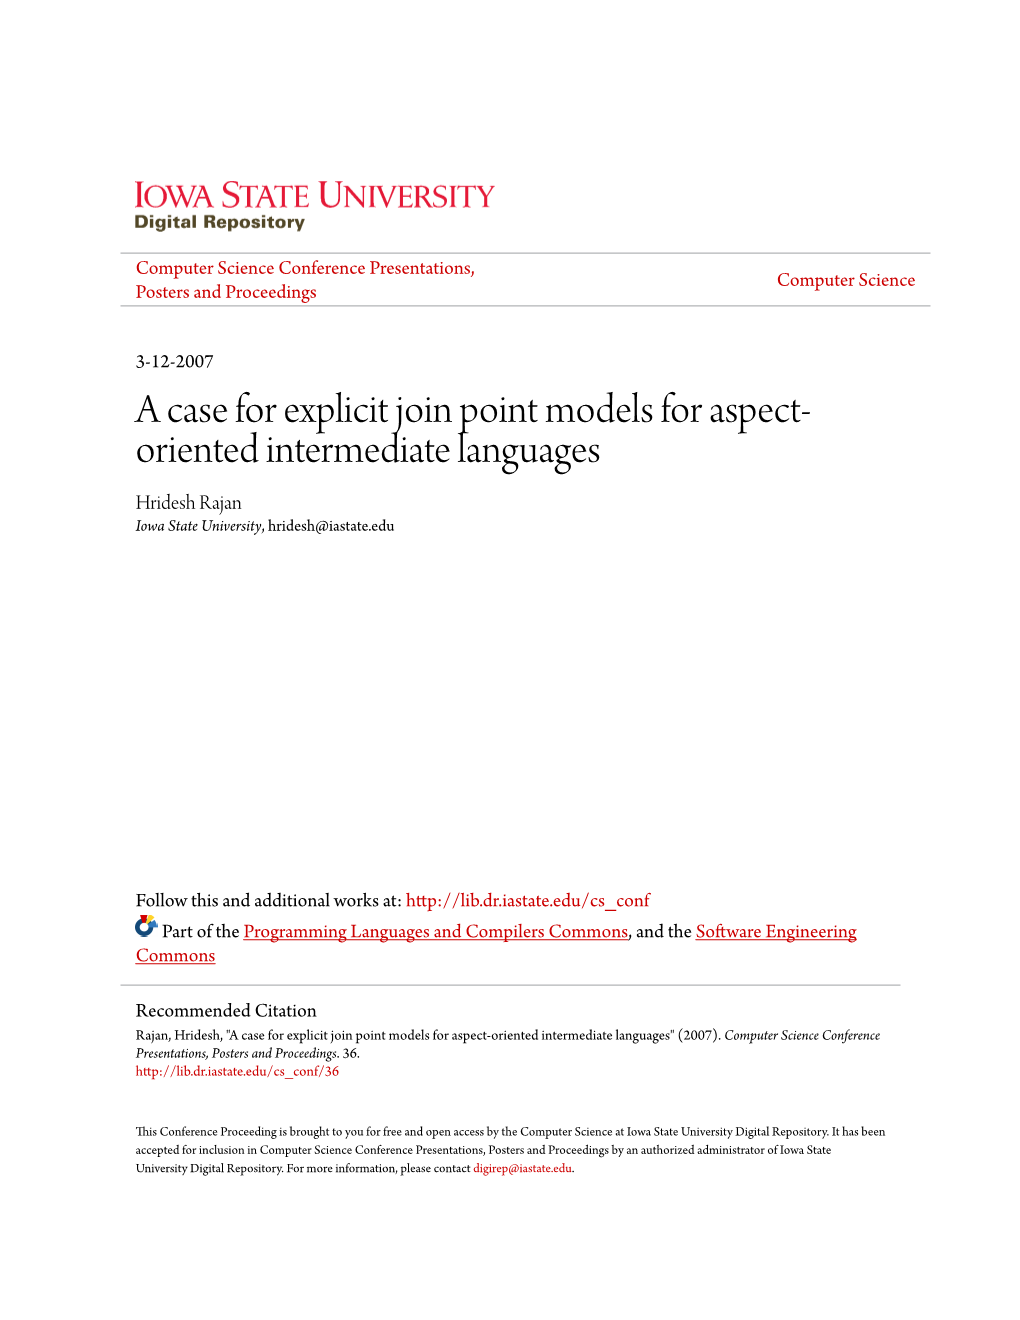 A Case for Explicit Join Point Models for Aspect-Oriented Intermediate Languages" (2007)